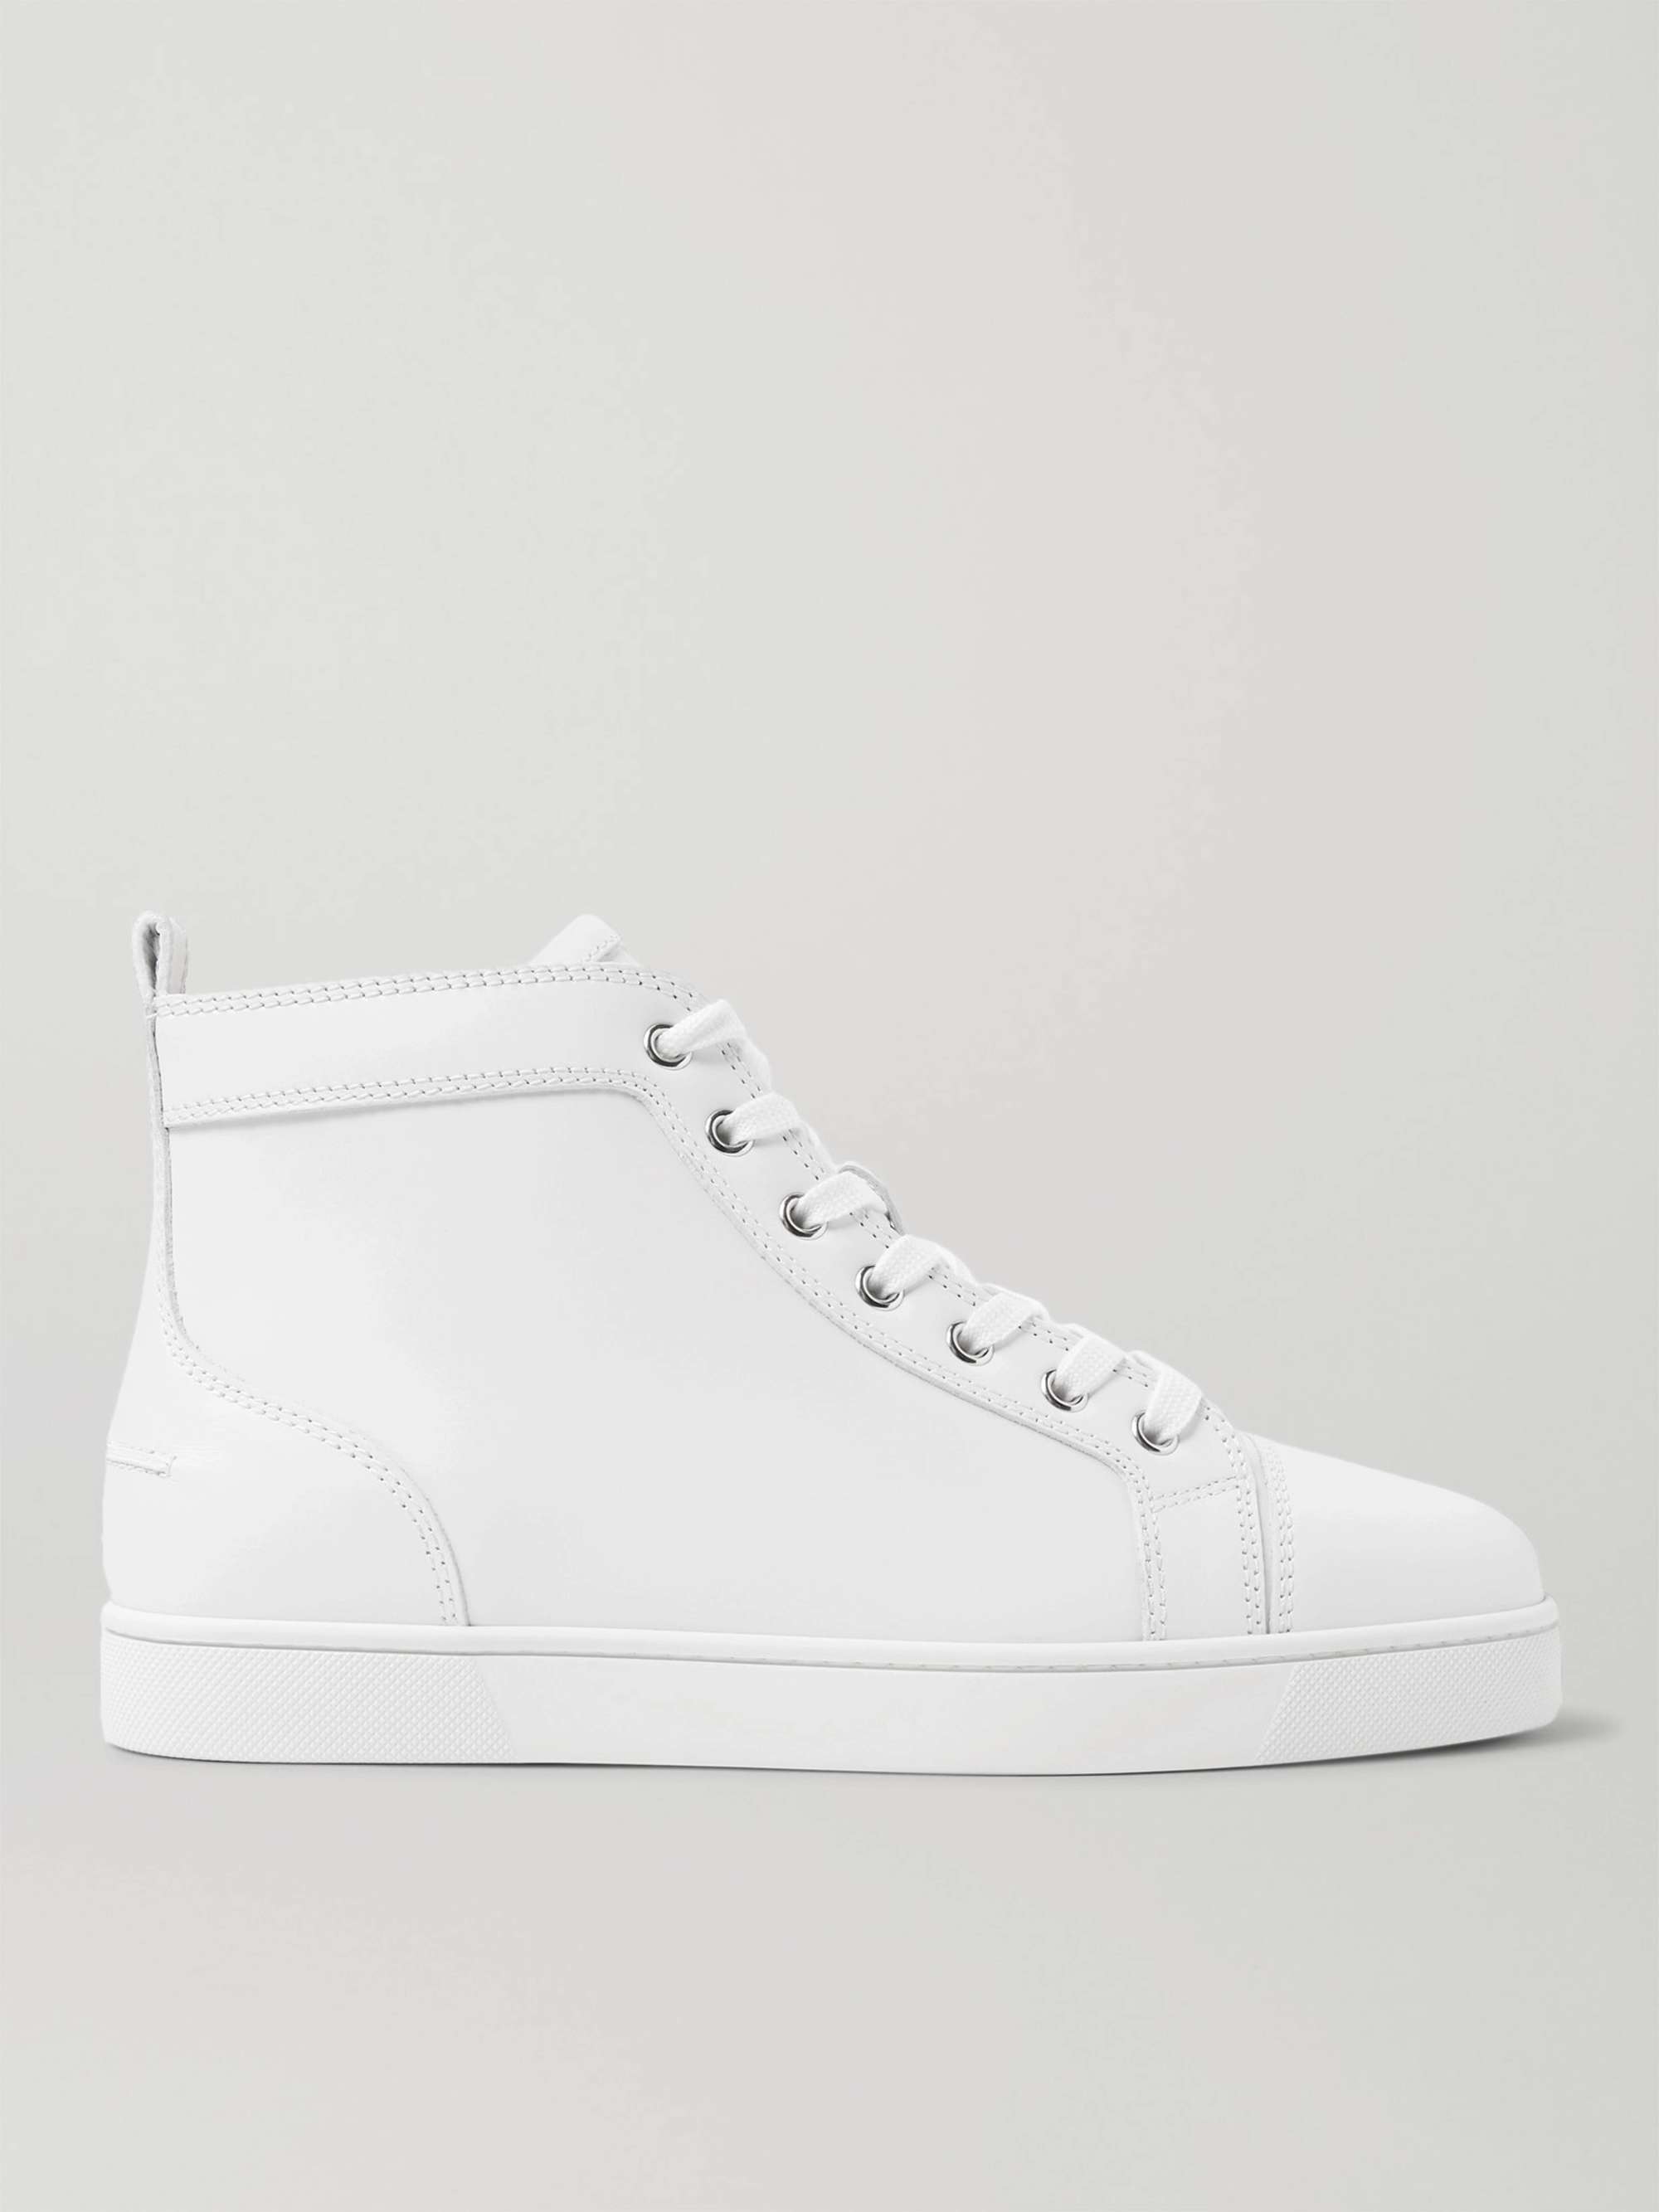 patrice jage garn CHRISTIAN LOUBOUTIN Louis Leather High-Top Sneakers for Men | MR PORTER